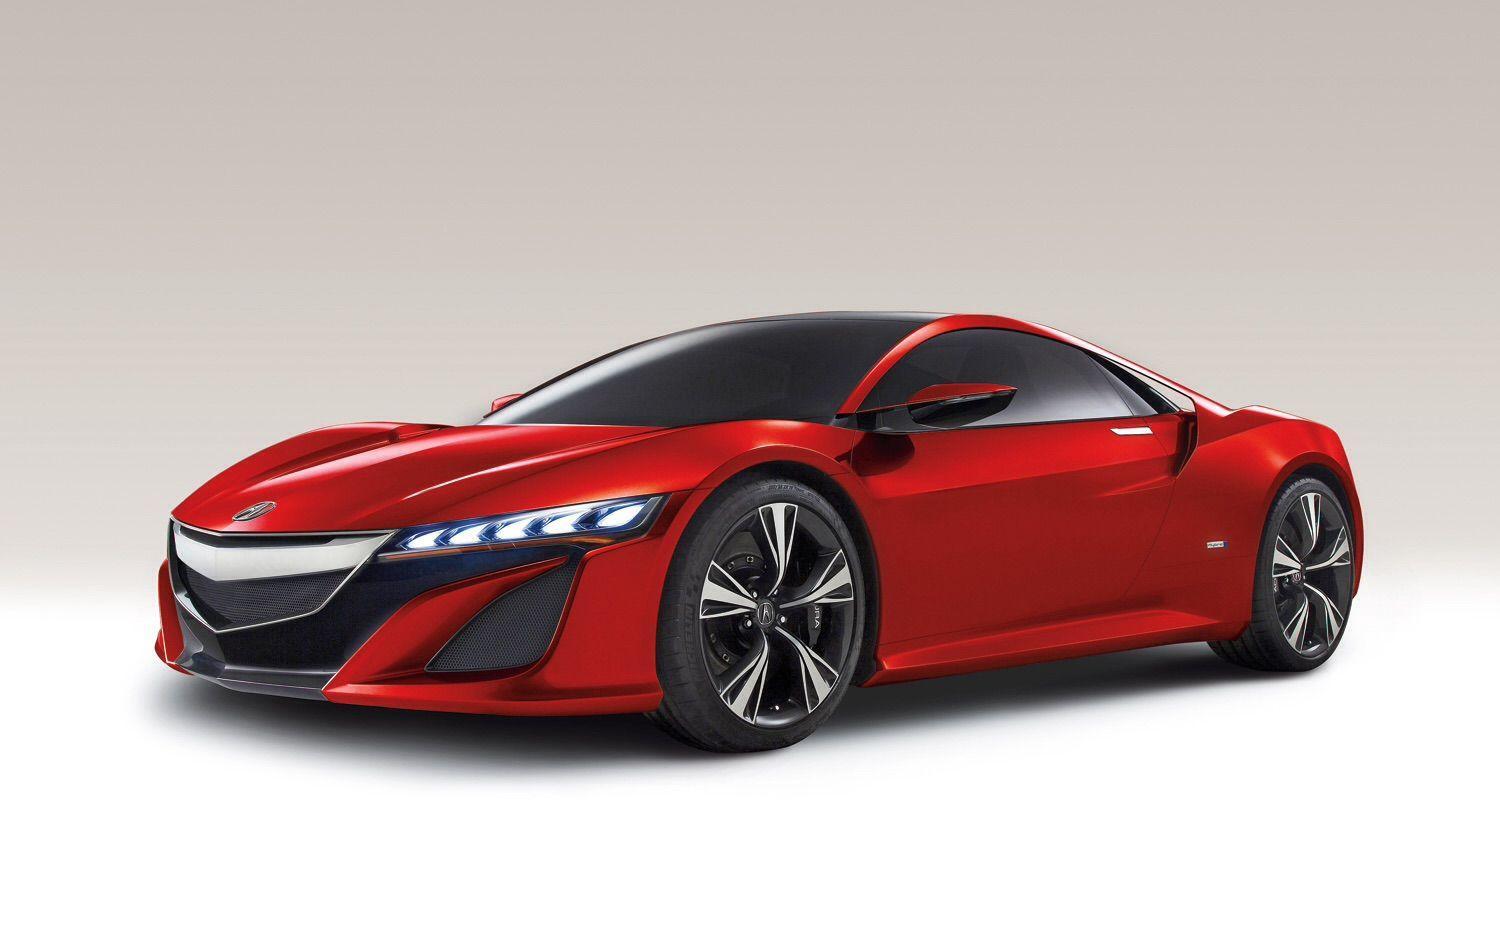 The 2017 Acura NSX is possibly the most beautiful car ever. Hands